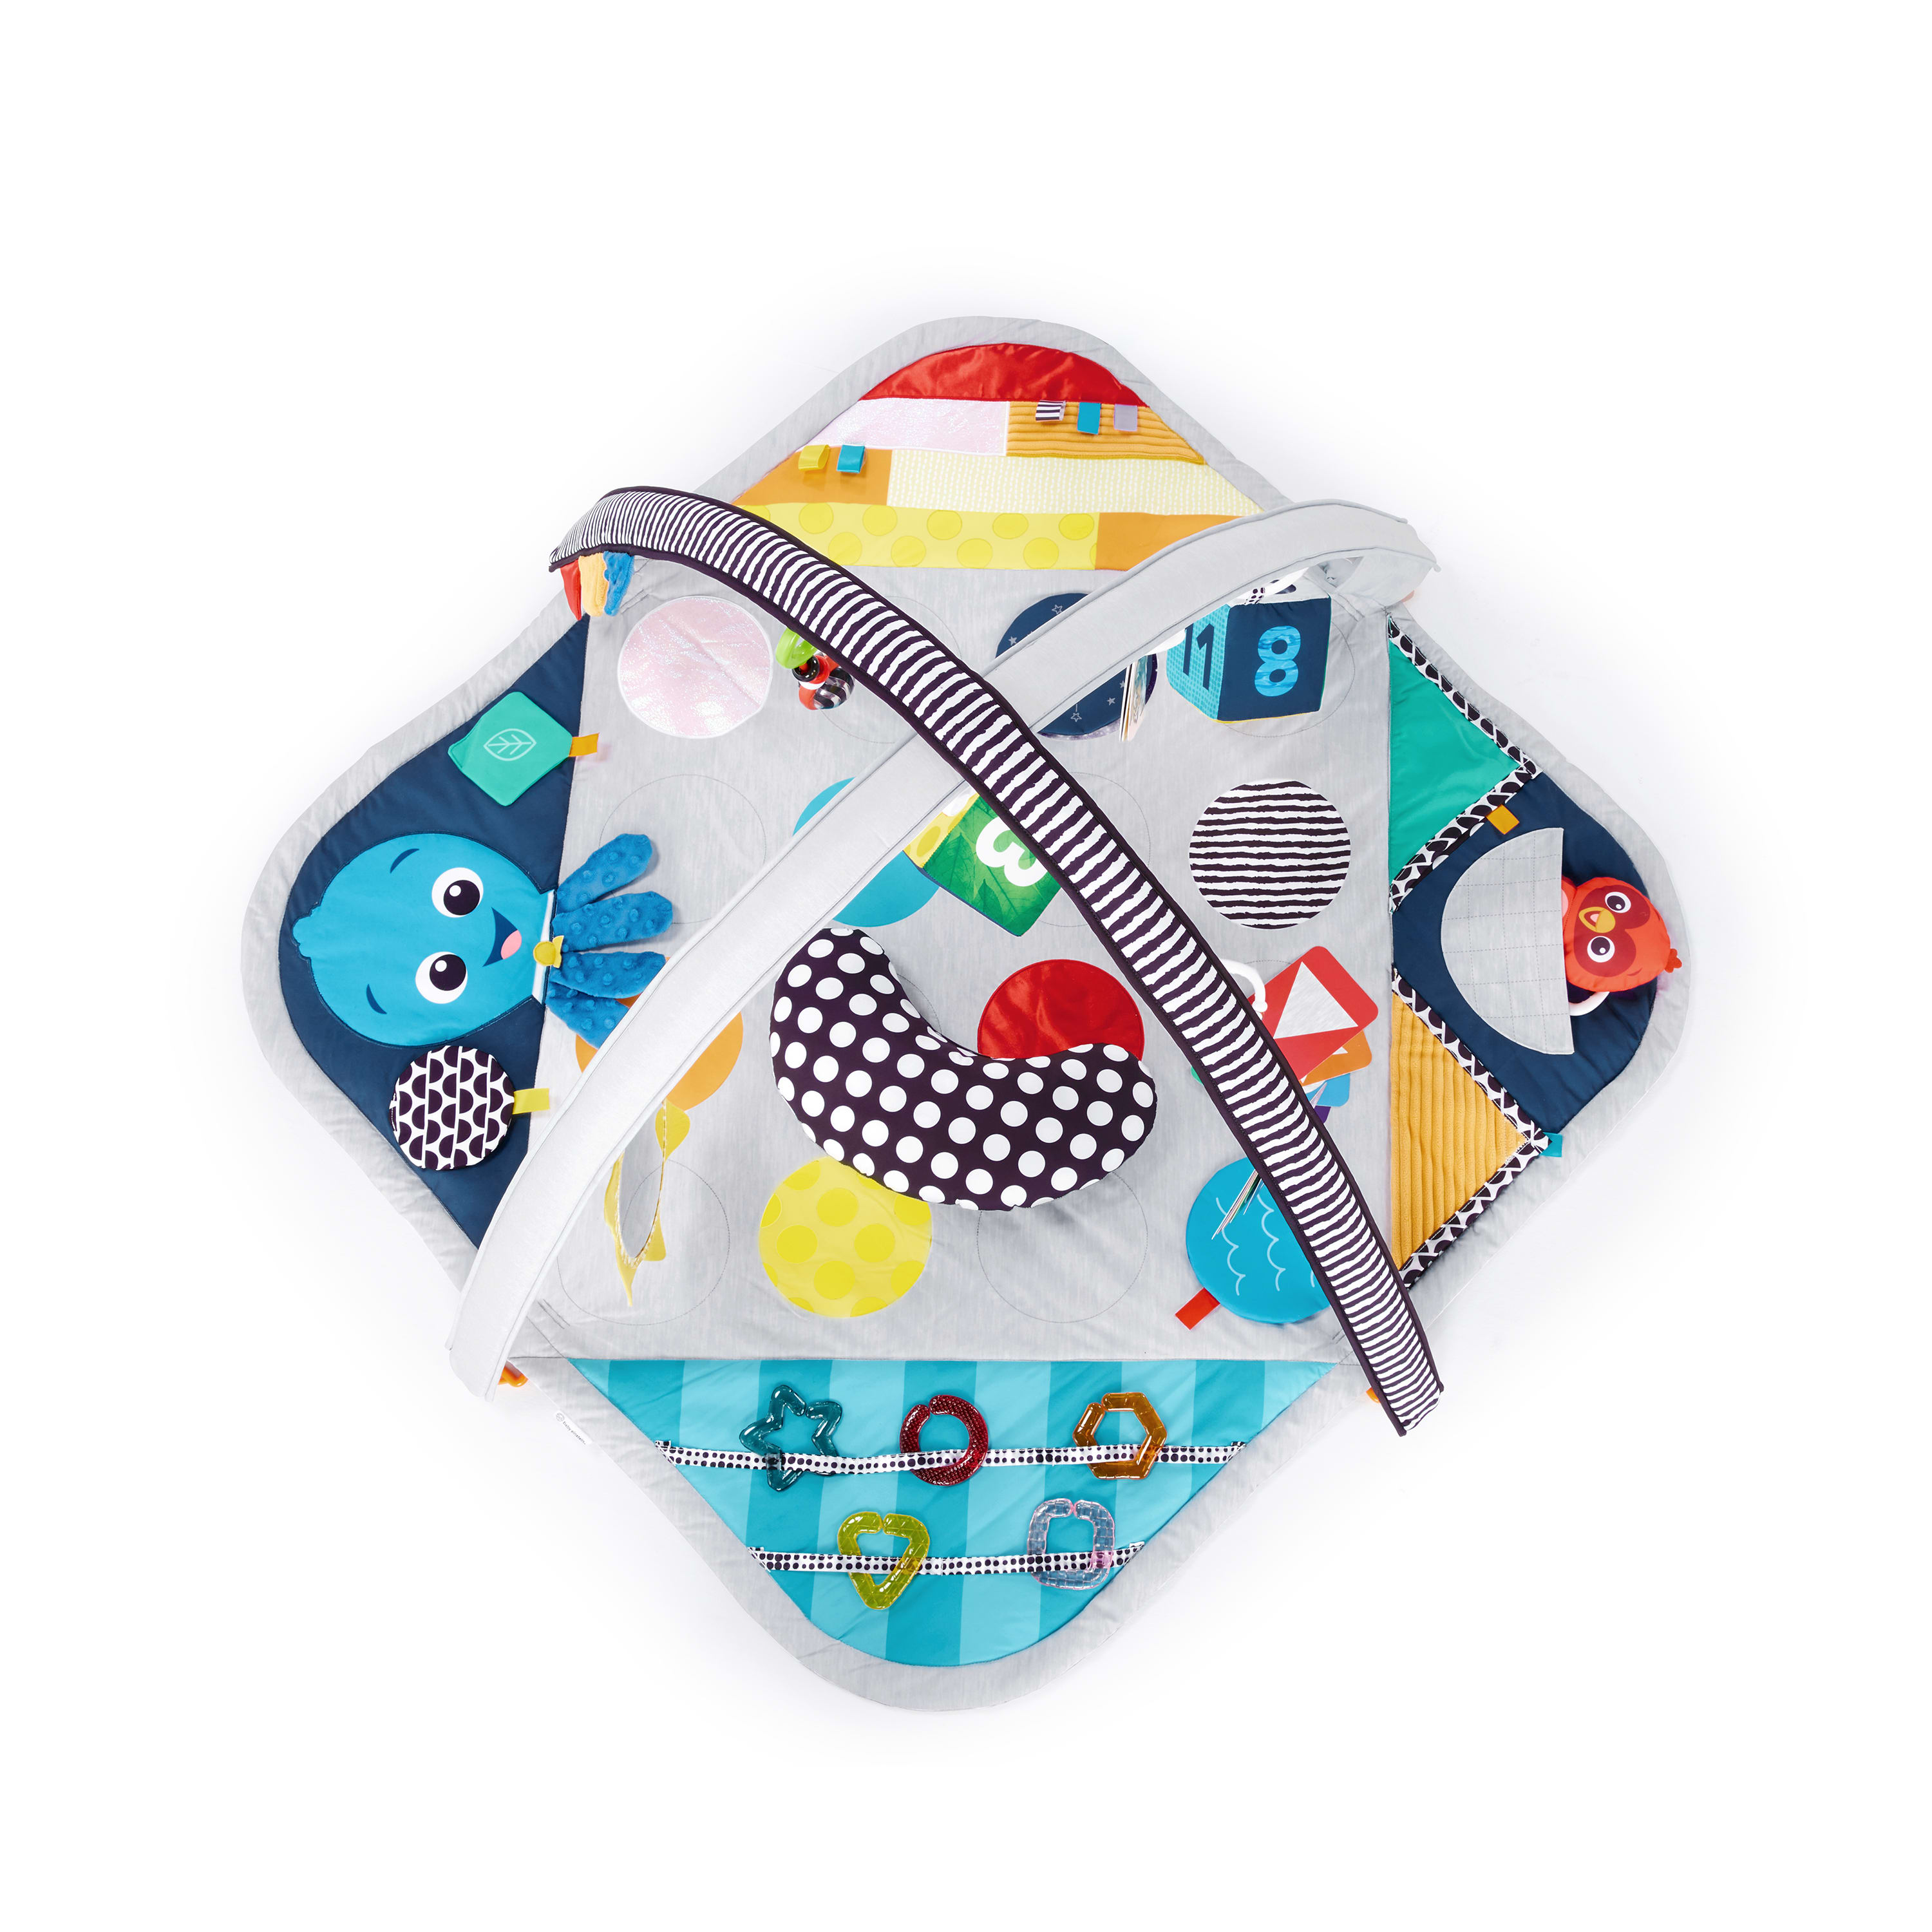 Baby Einstein Sensory Play Space Newborn-to-Toddler Discovery Gym and Play Mat, Ages Newborn + - image 5 of 17